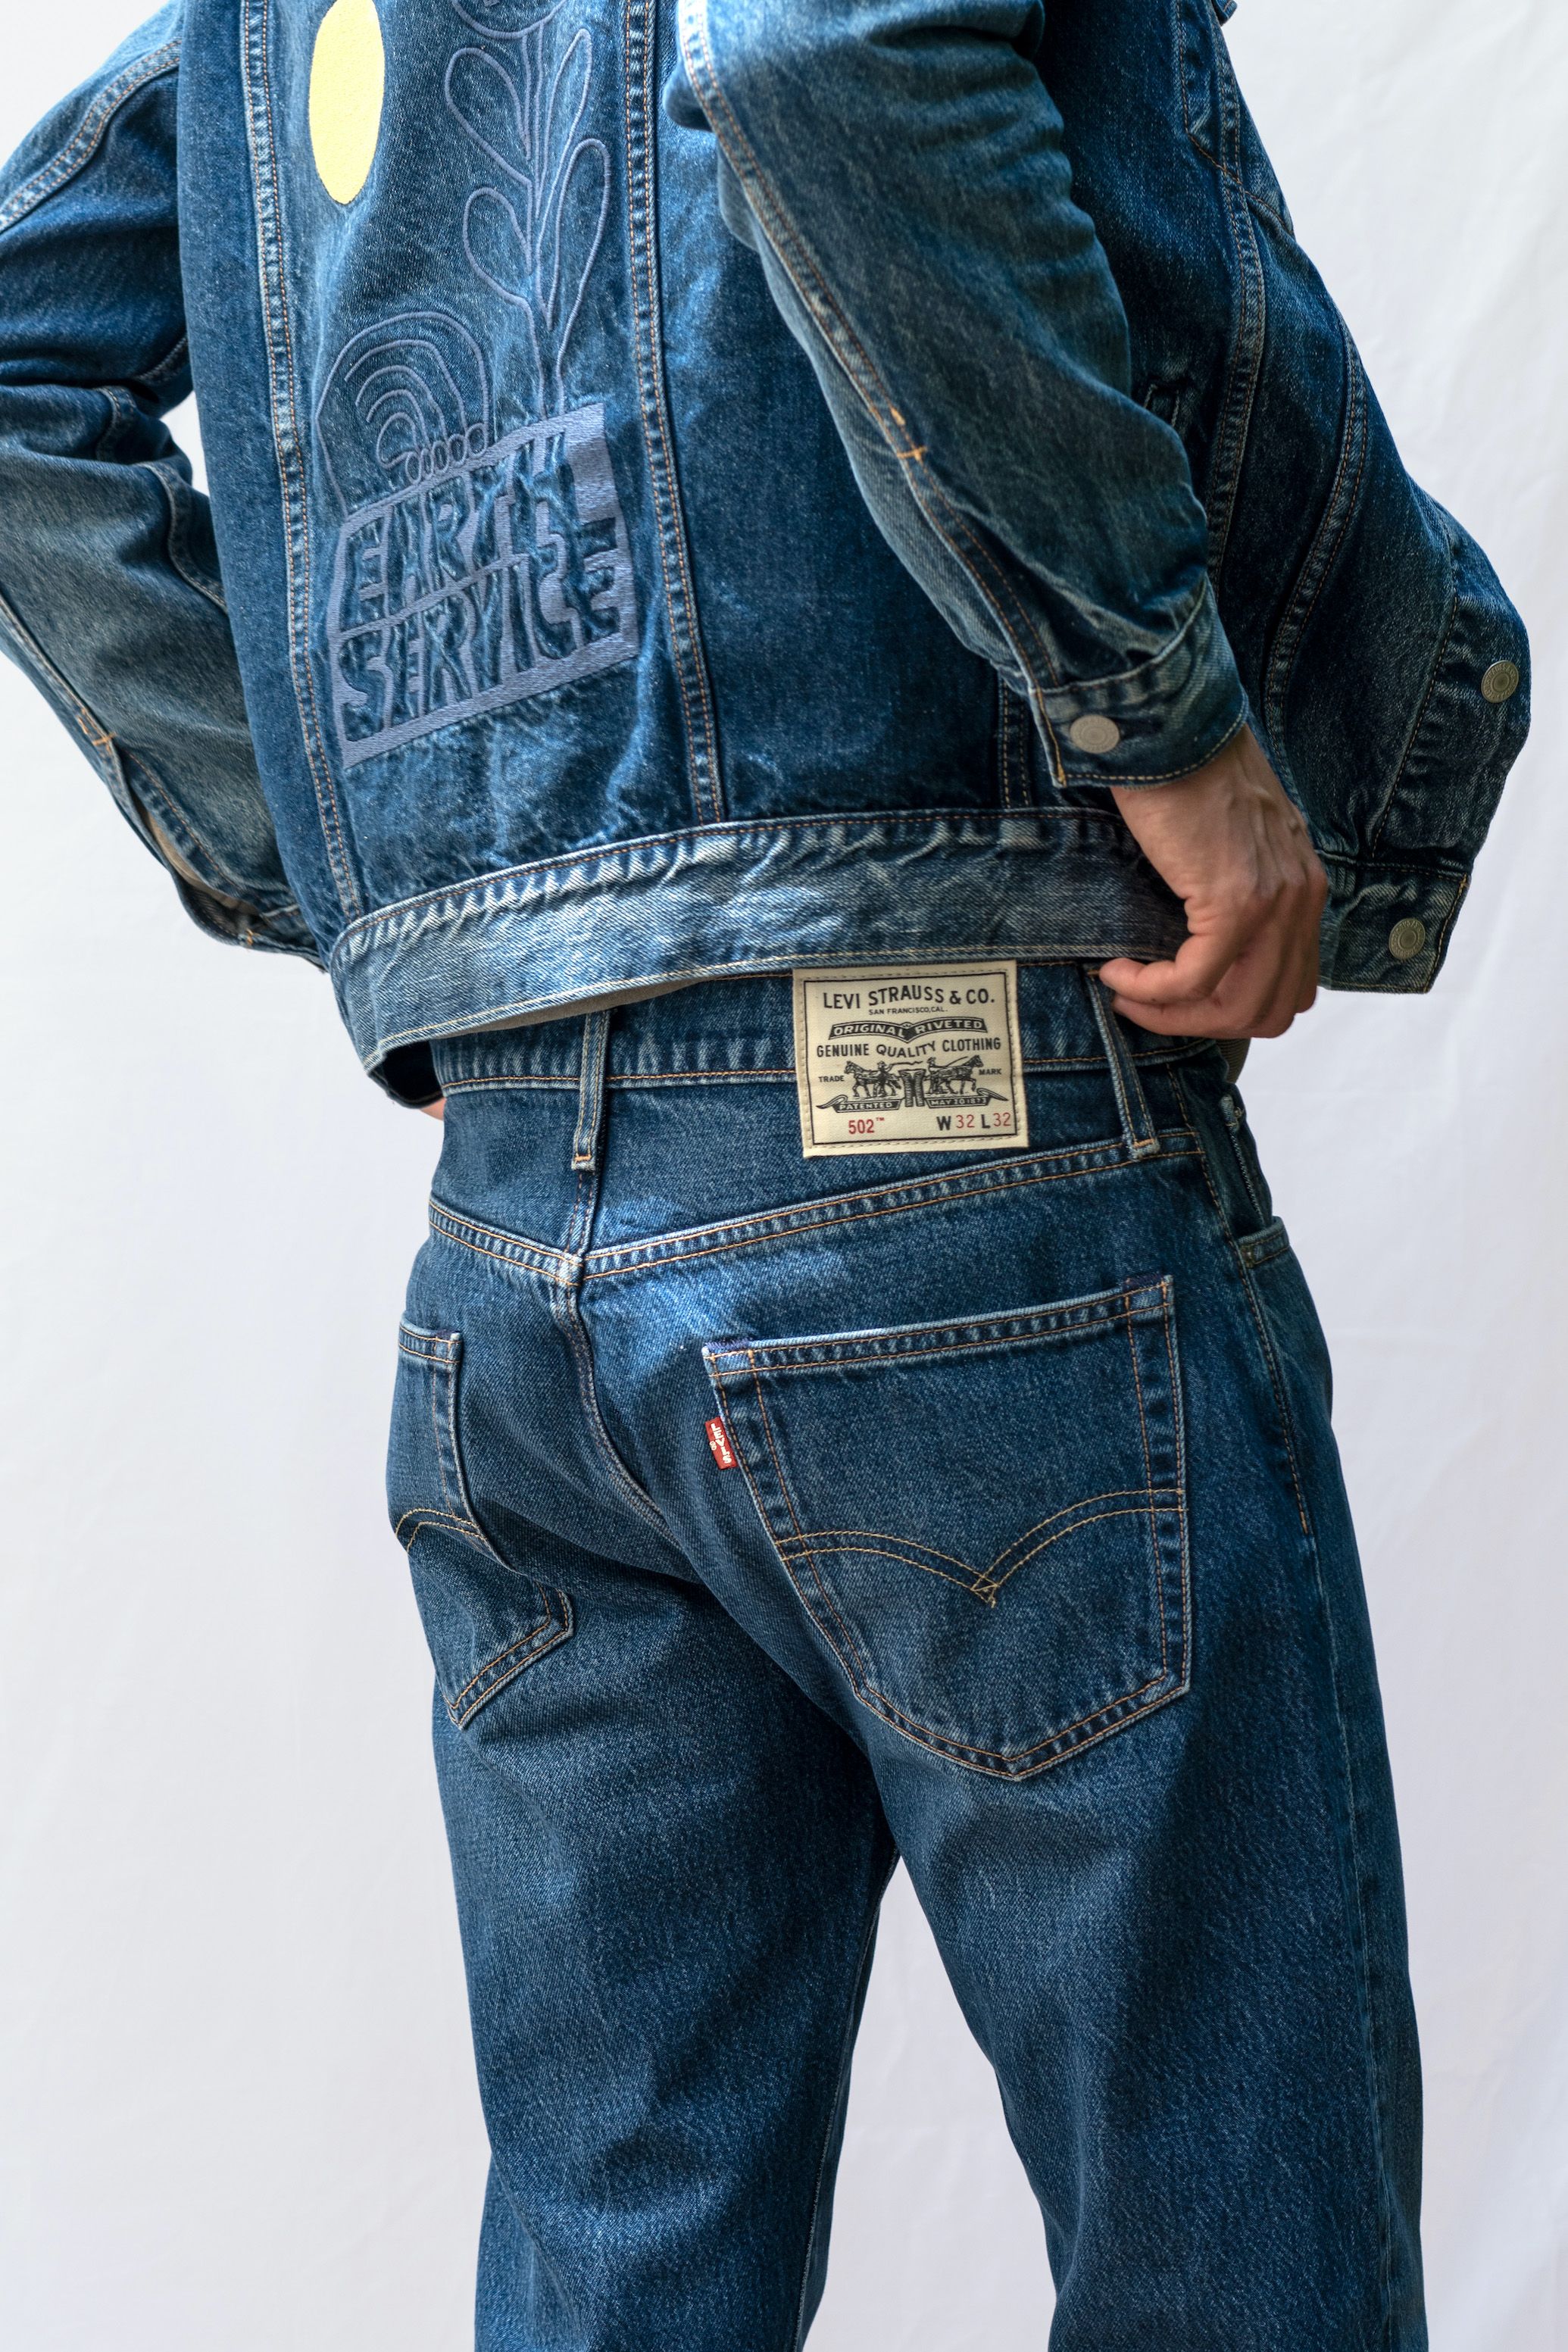 levis recycled plastic jeans